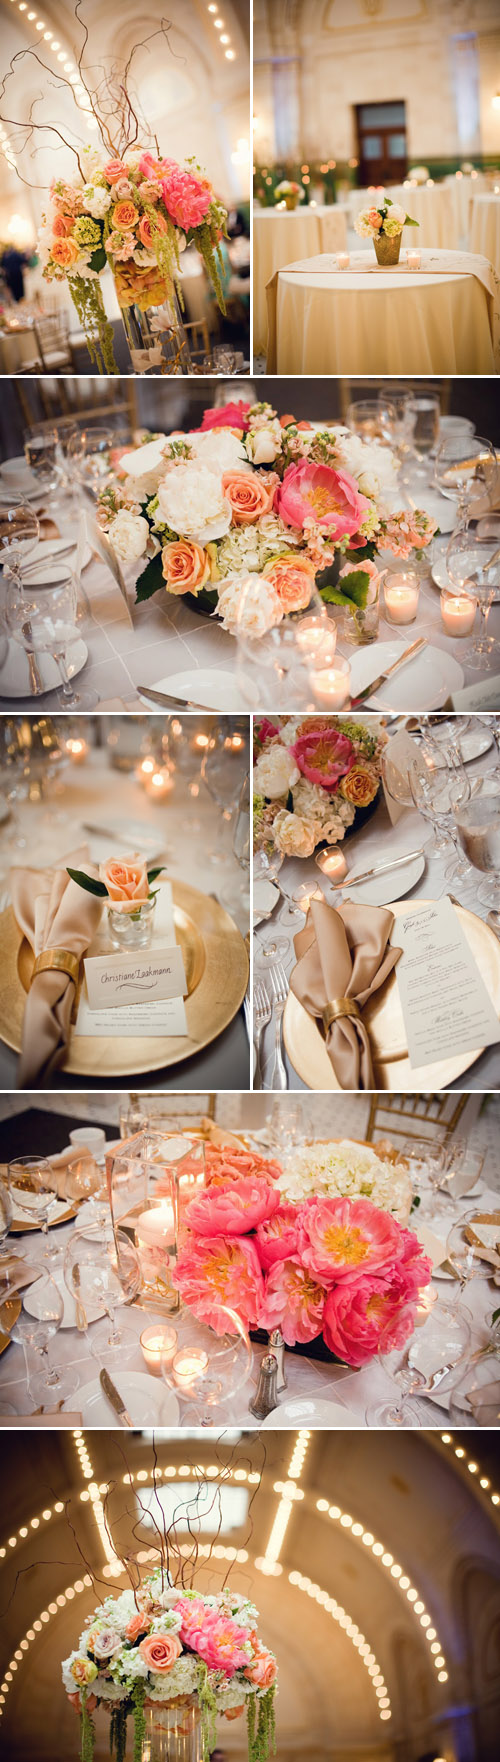 romantic ivory, gold, champagne and peach wedding floral decor at Union Station, Seattle, photos by Stephanie Cristalli Photography